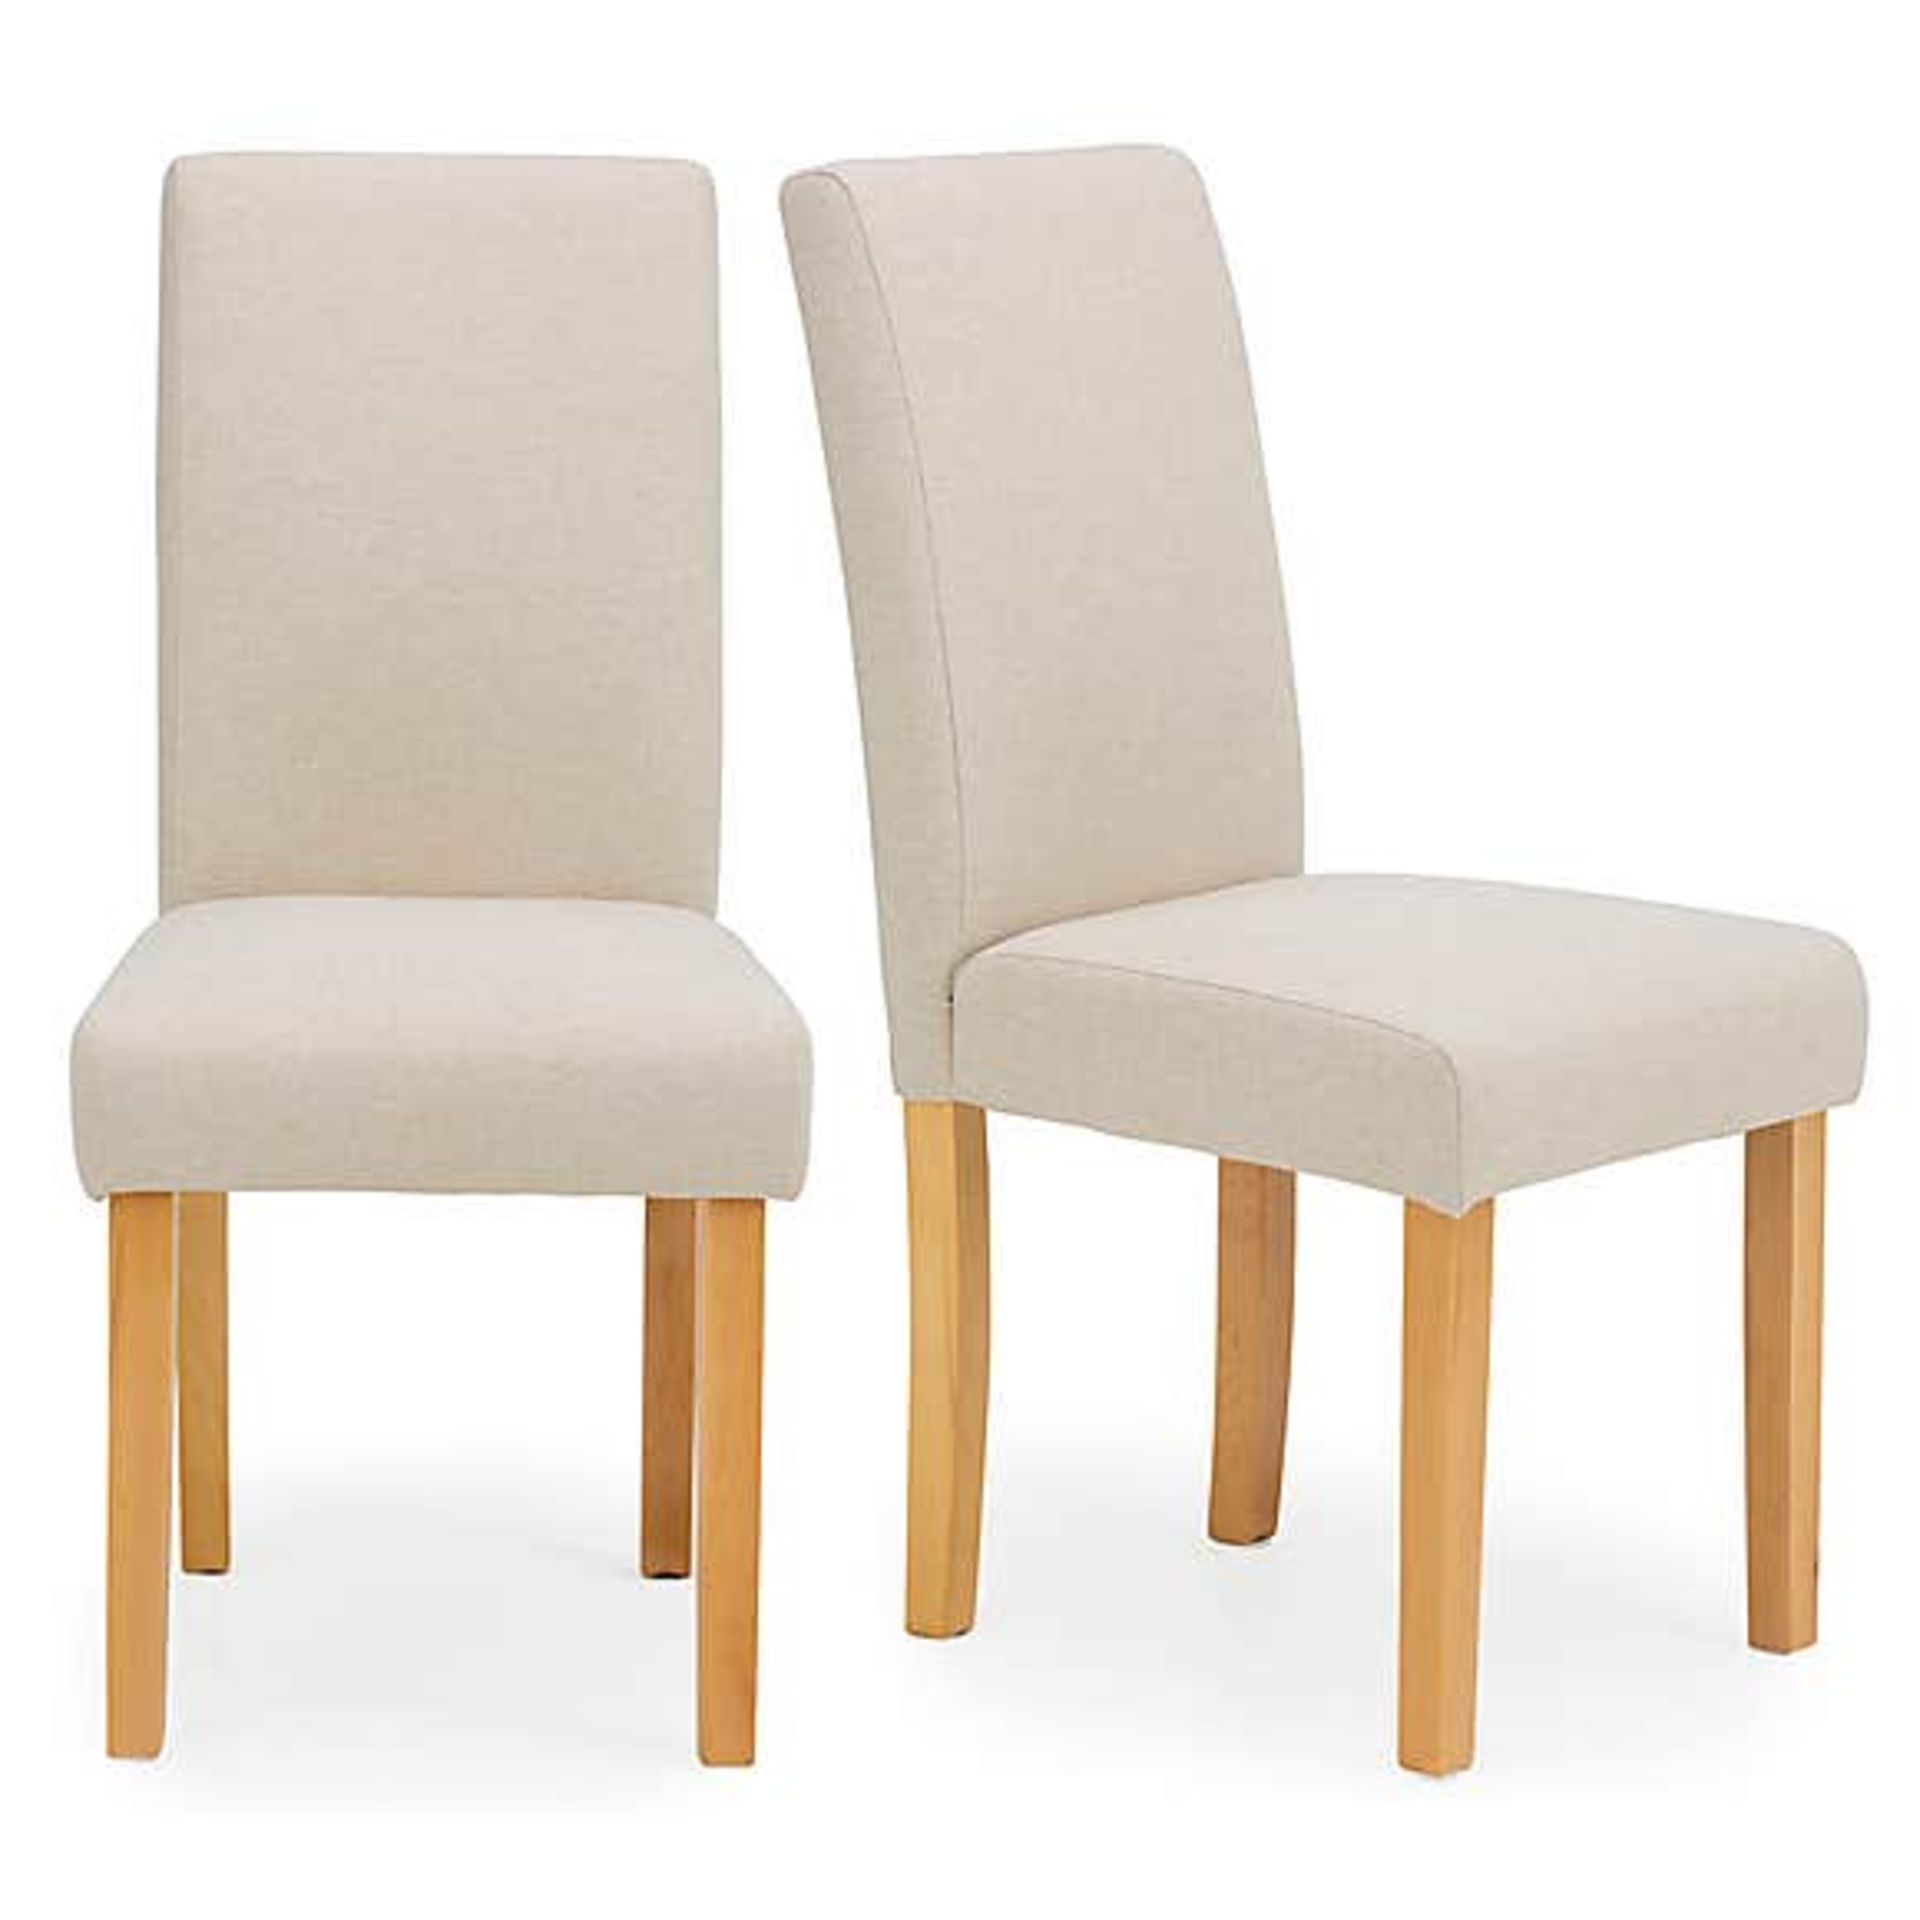 BOXED 1 PAIR MIA DINING CHAIR IN CREAM WITH NATURAL LEGS RRP £65Condition ReportAppraisal